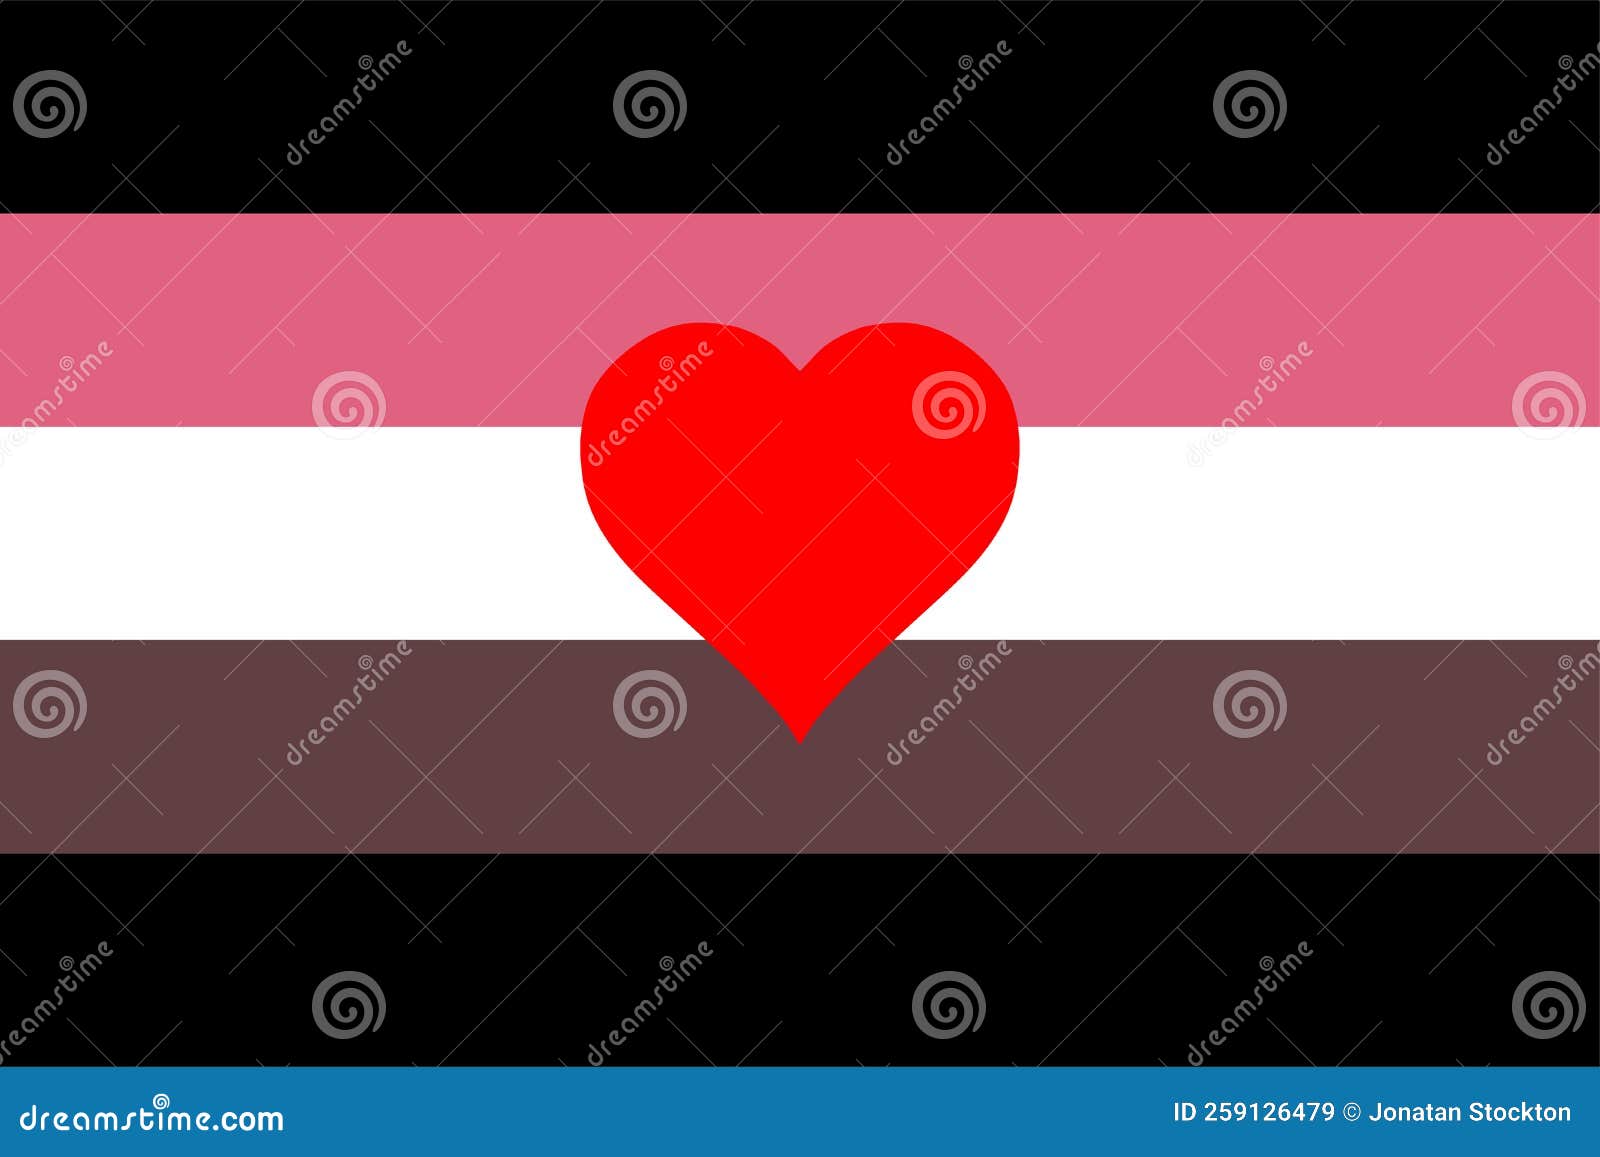 Fat Fetish Flag Pride Vector Illustration Isolated pic